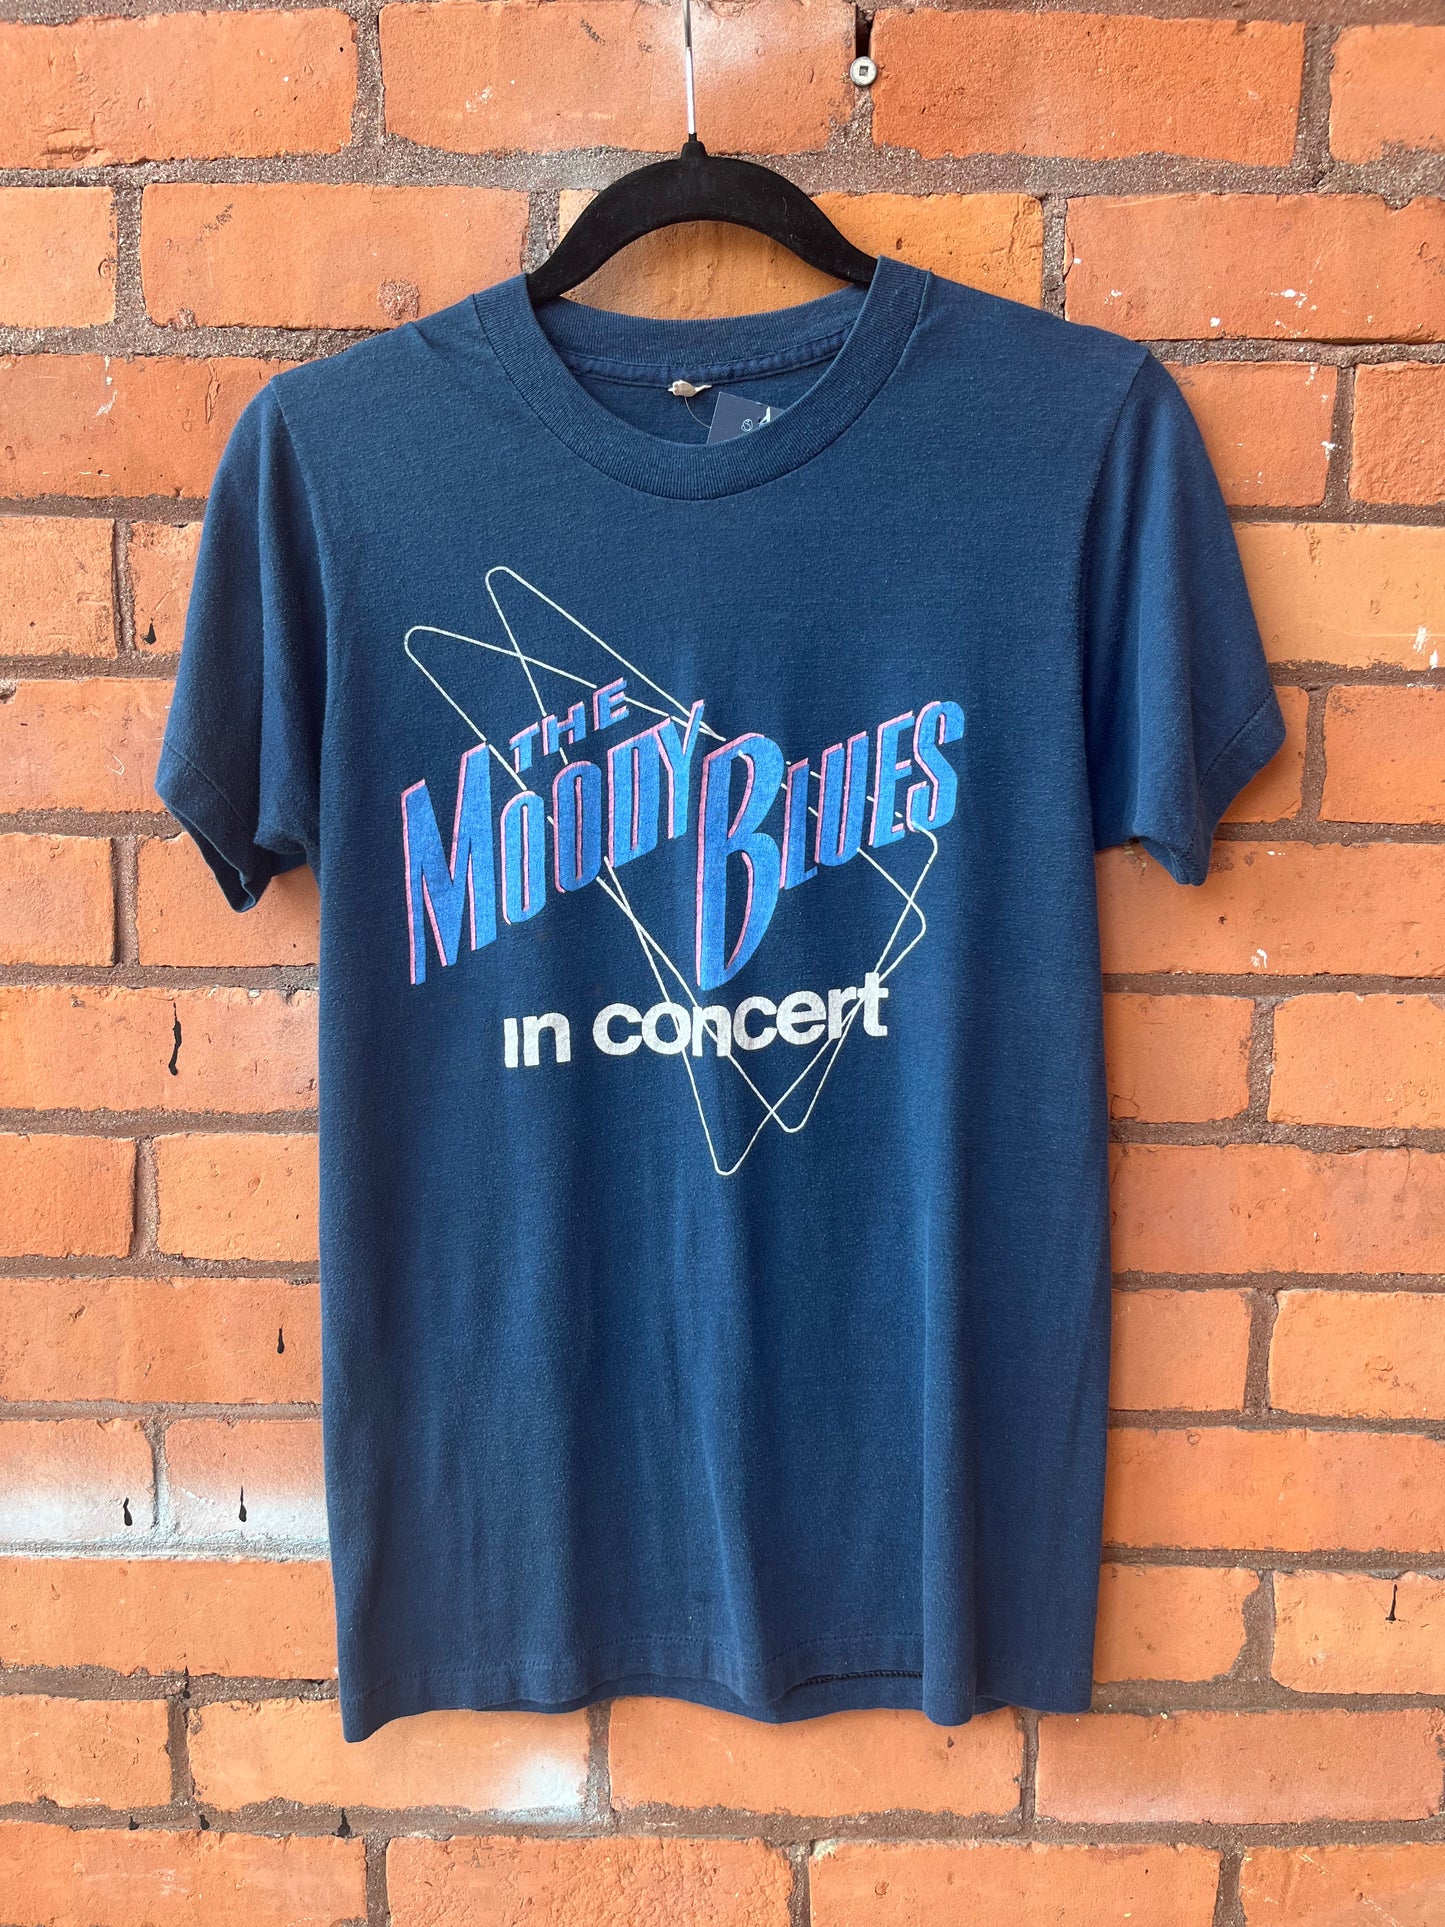 70’s Vintage The Moody Blues Concert Band Tee / Size S